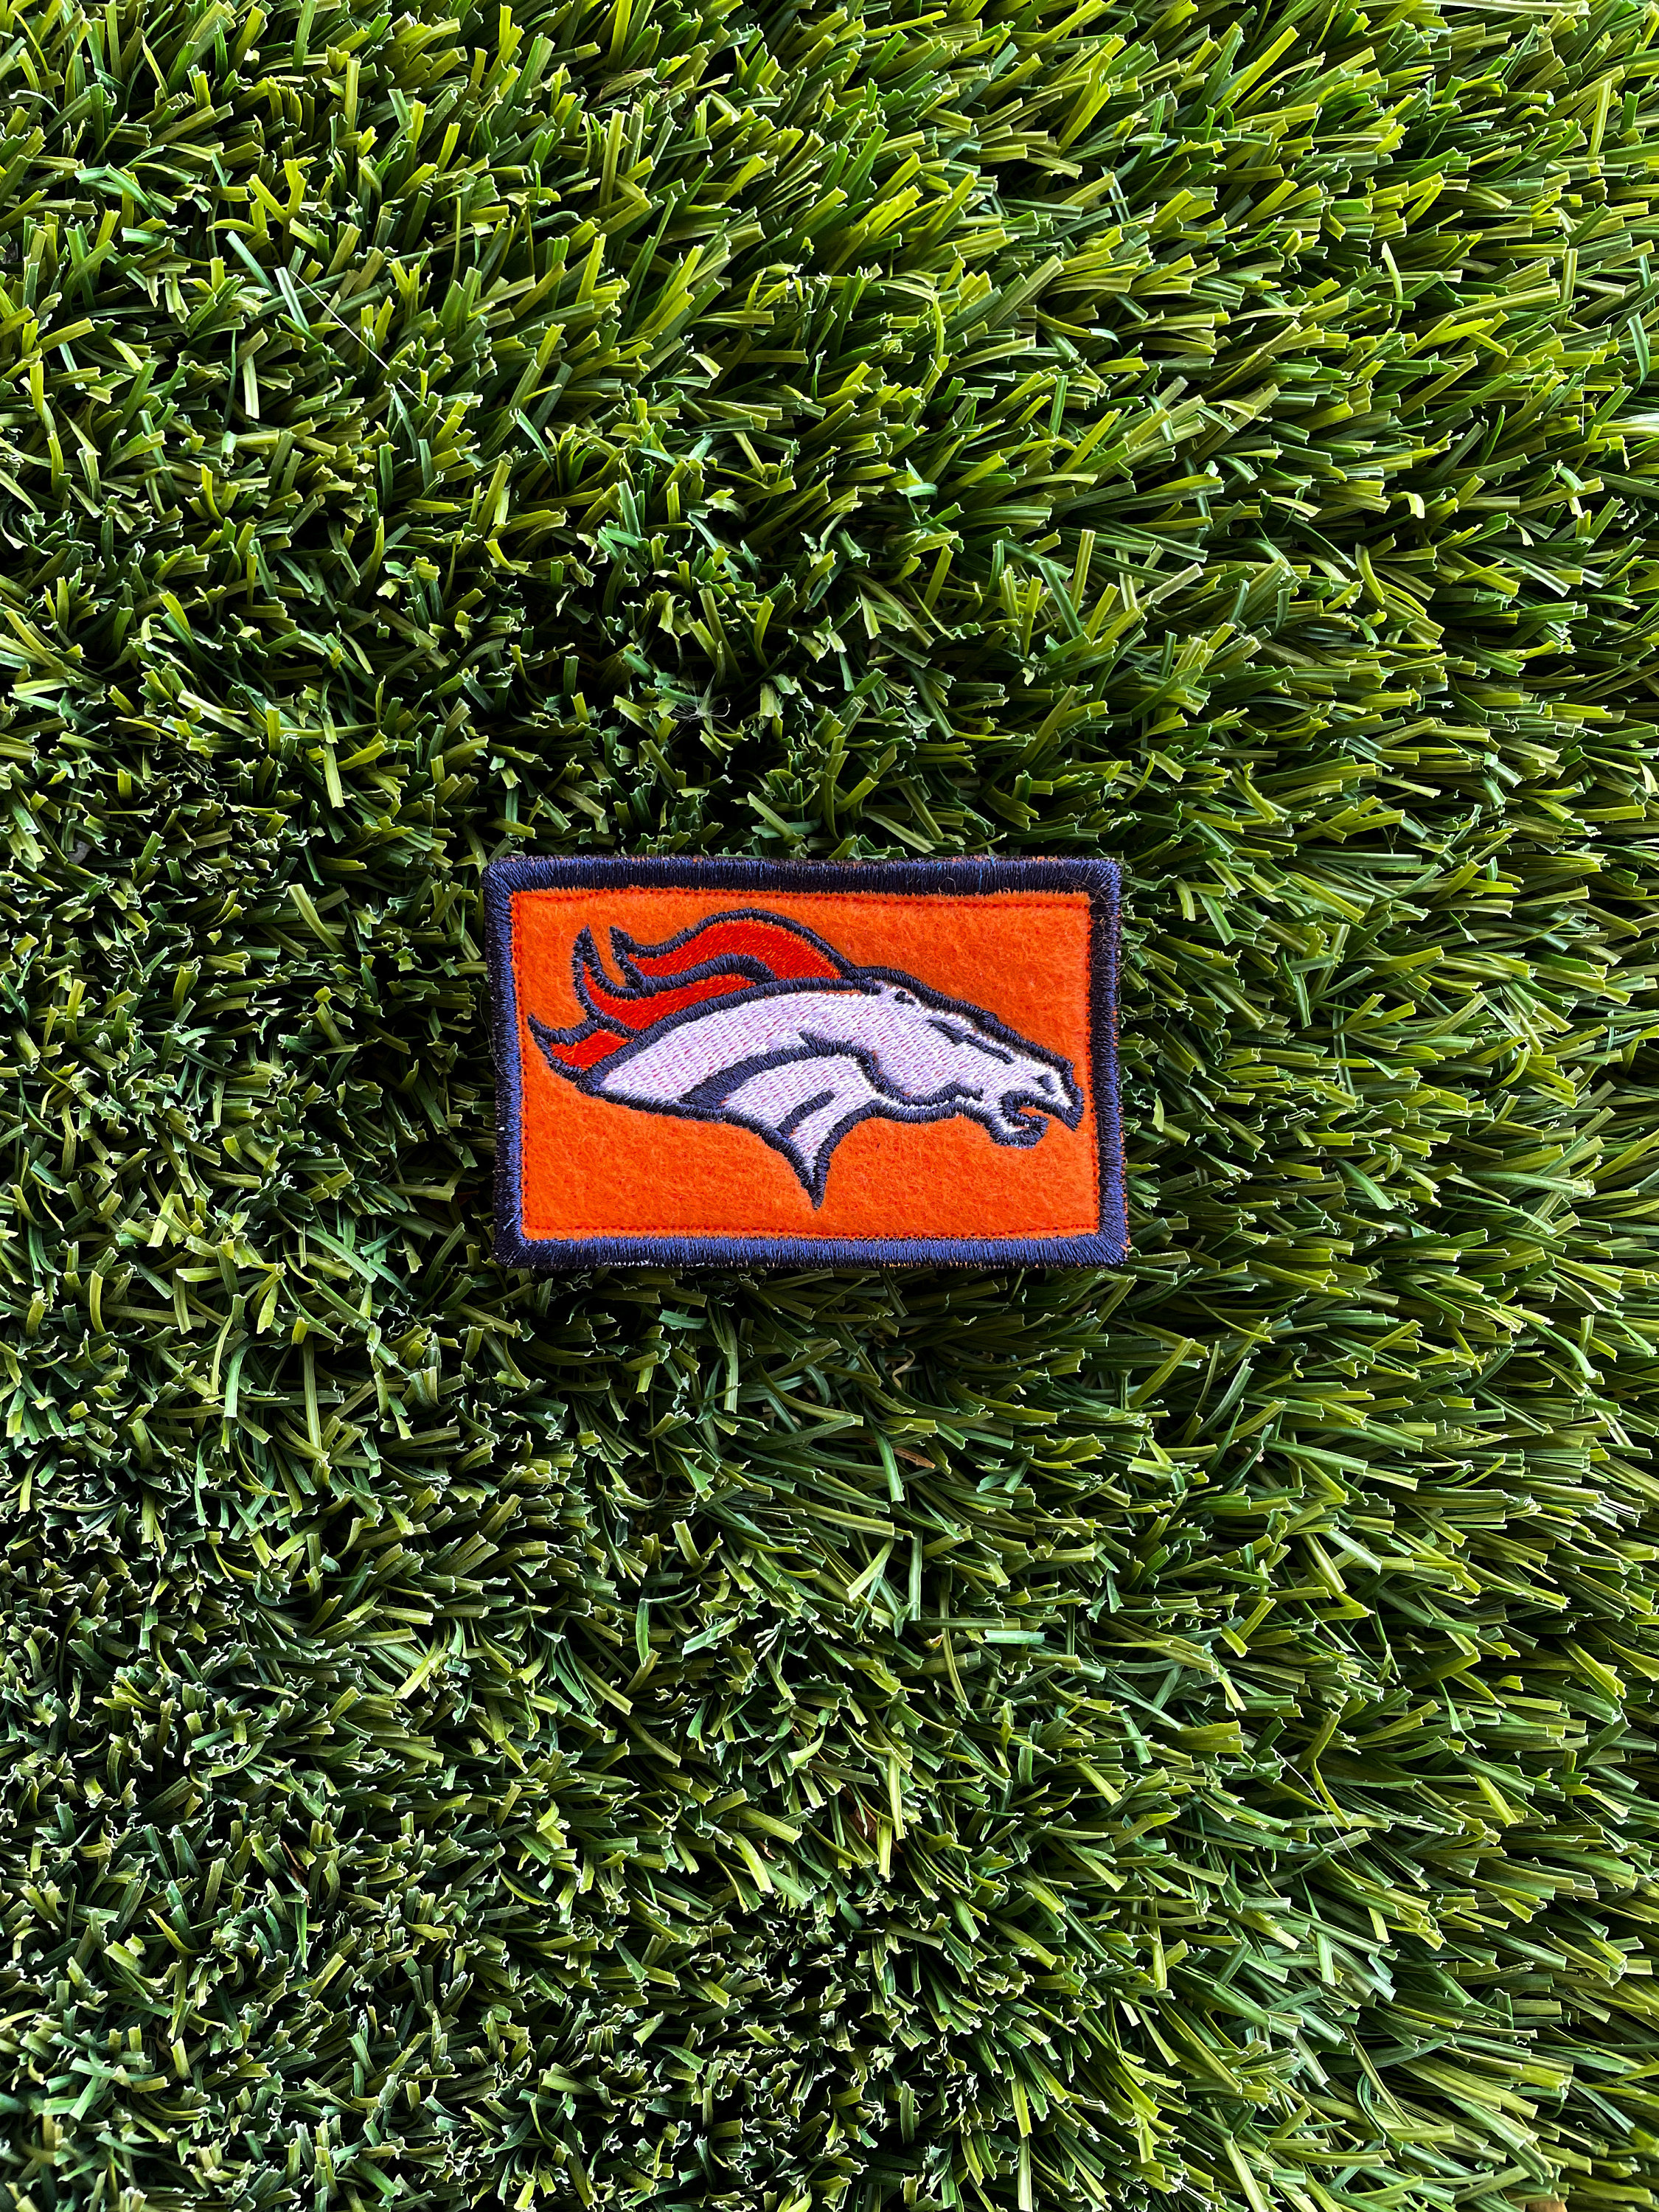 Denver Broncos Iron On Patches - Beyond Vision Mall